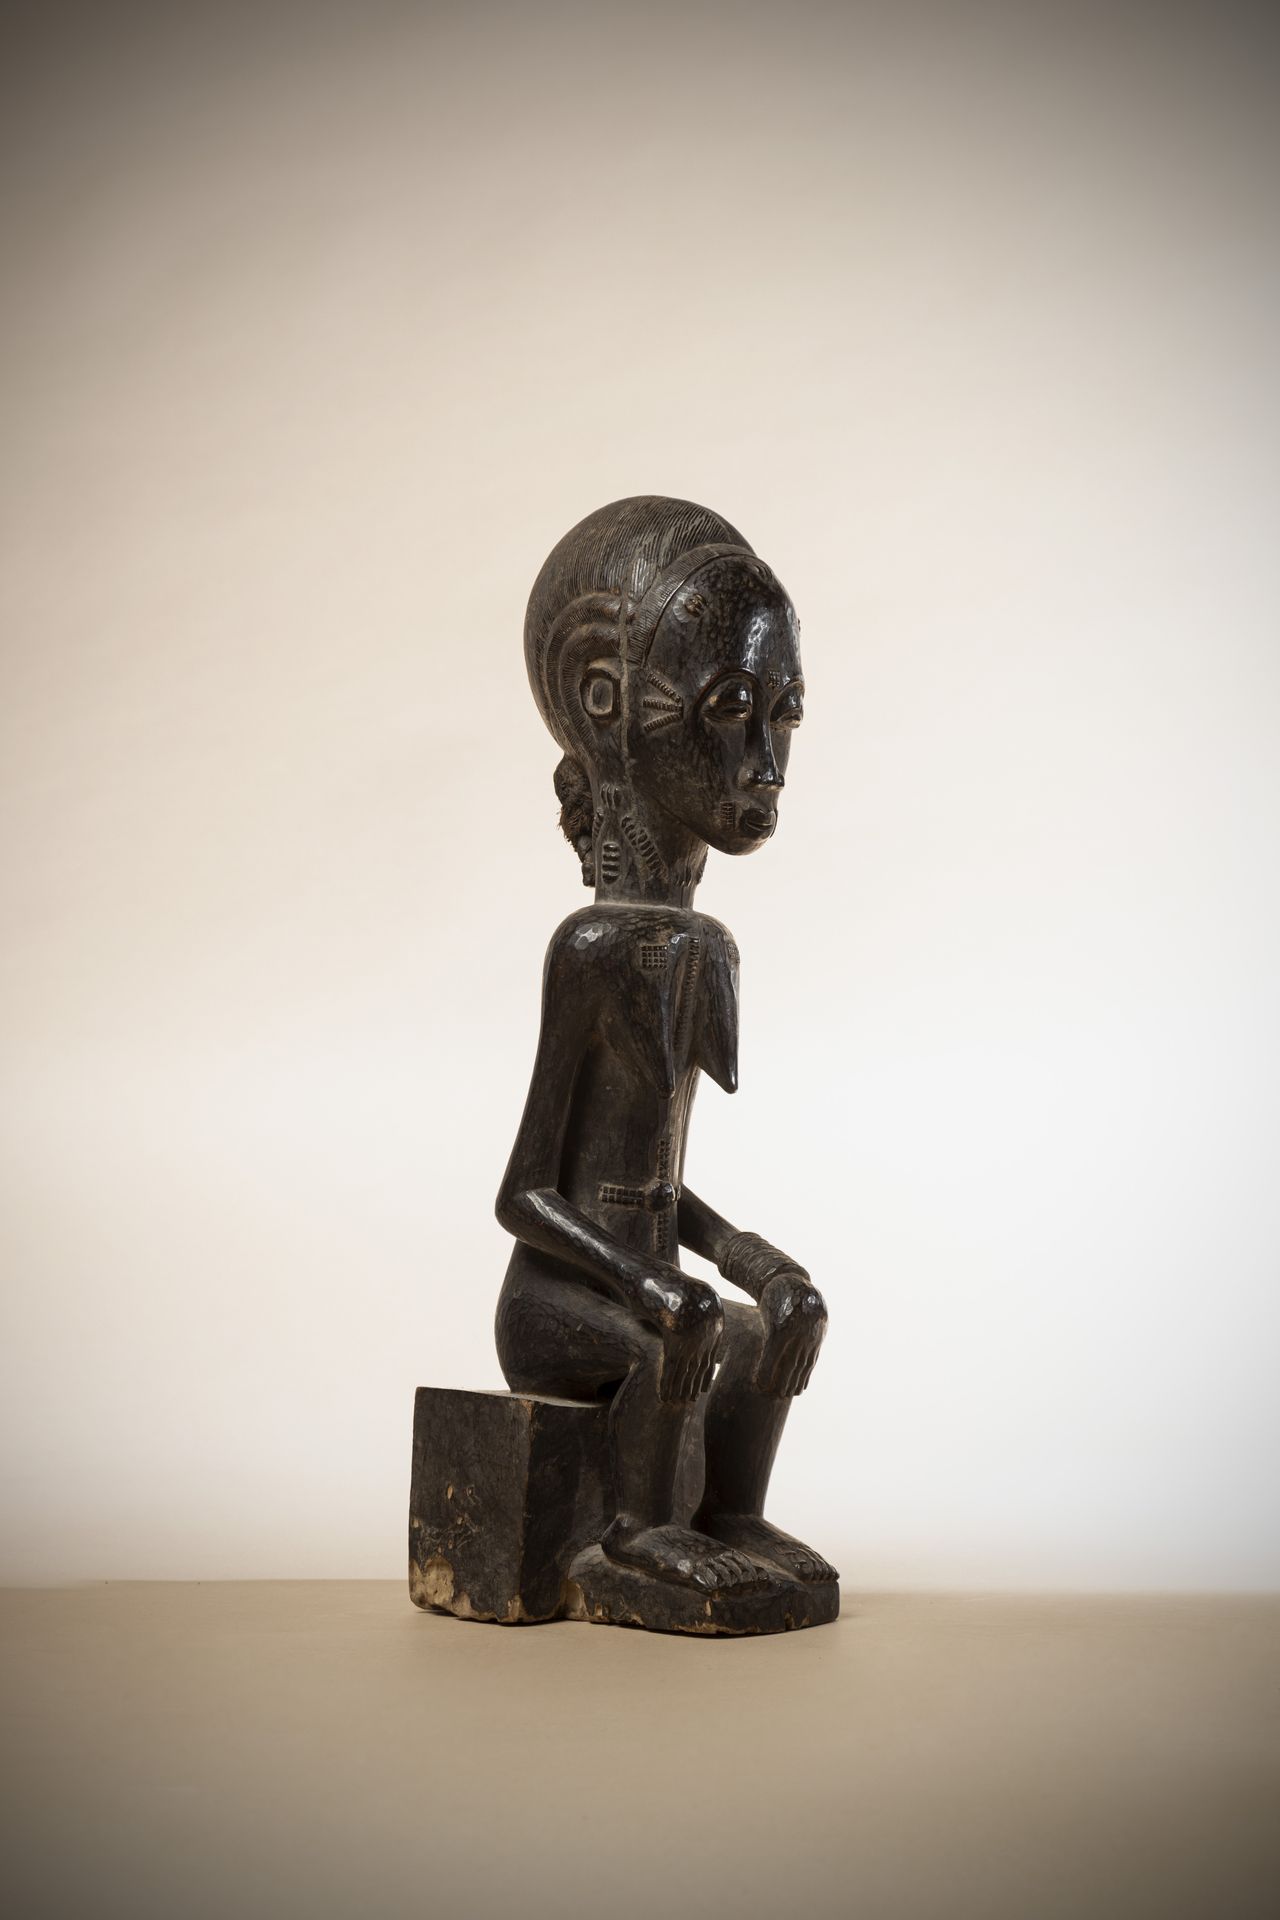 Null BAOULE (Ivory Coast)

female statue sitting on the traditional seat with ha&hellip;